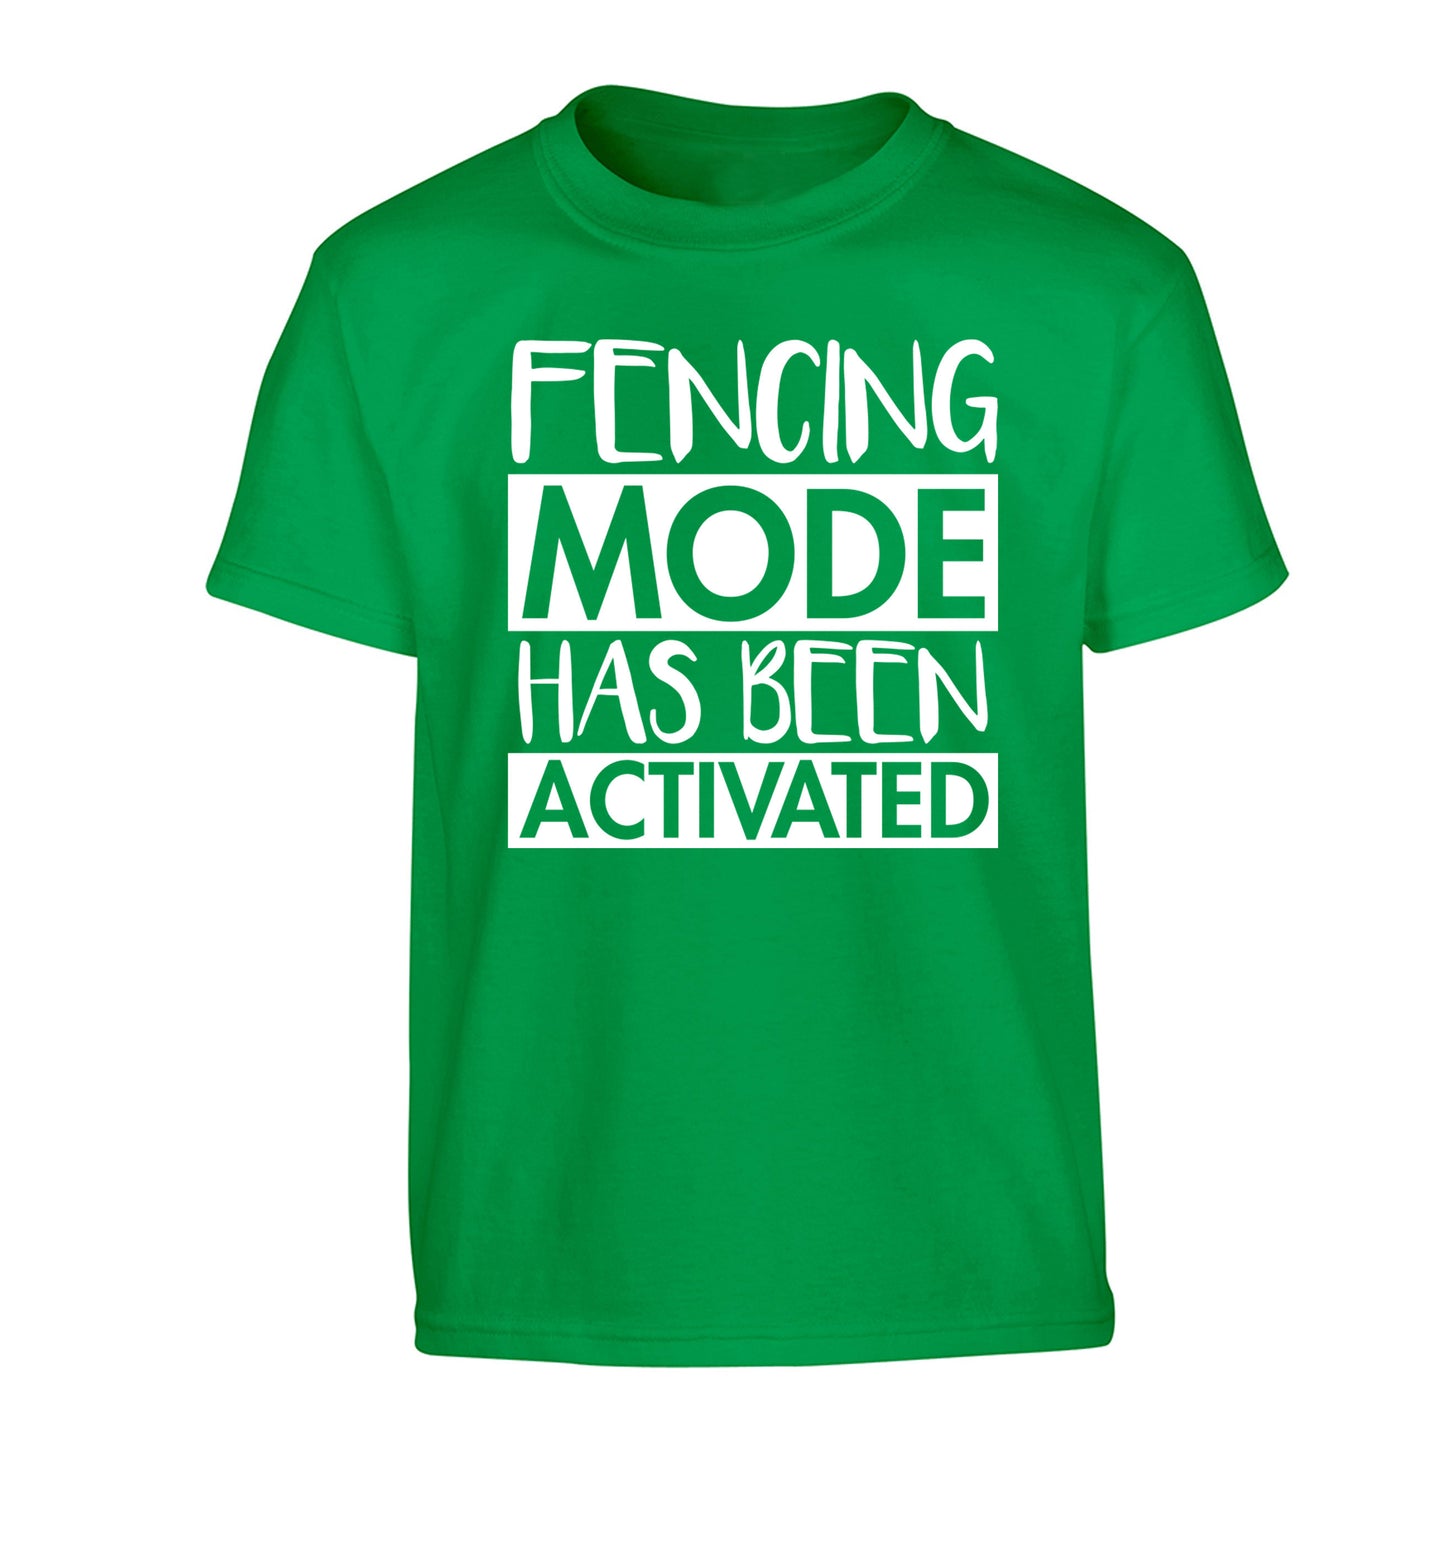 Fencing mode activated Children's green Tshirt 12-14 Years